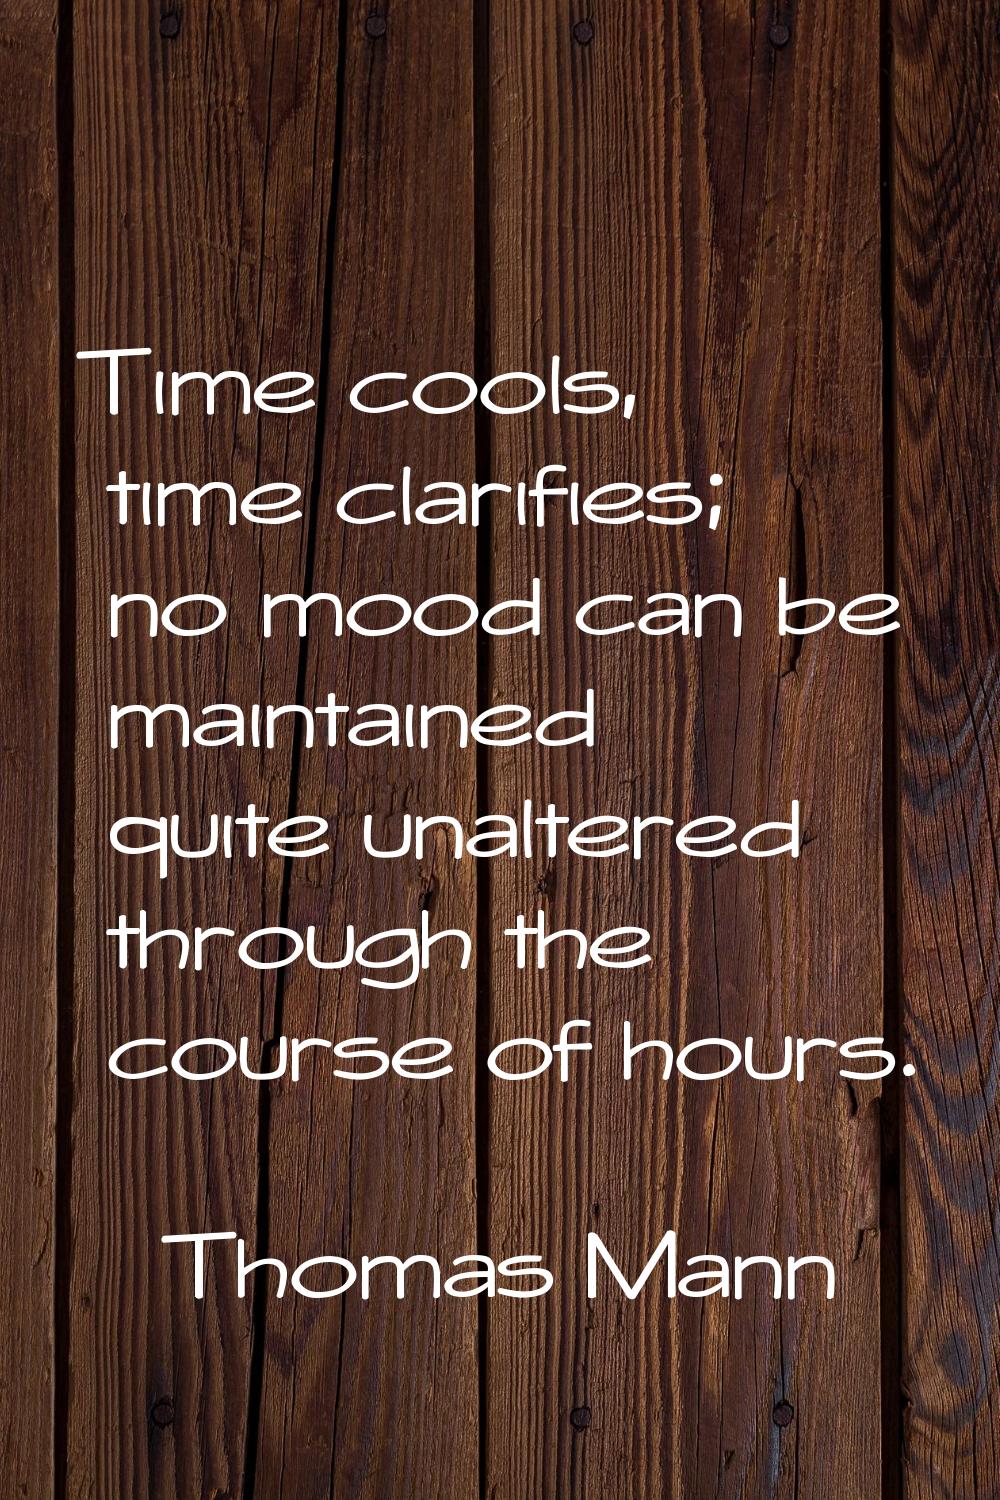 Time cools, time clarifies; no mood can be maintained quite unaltered through the course of hours.